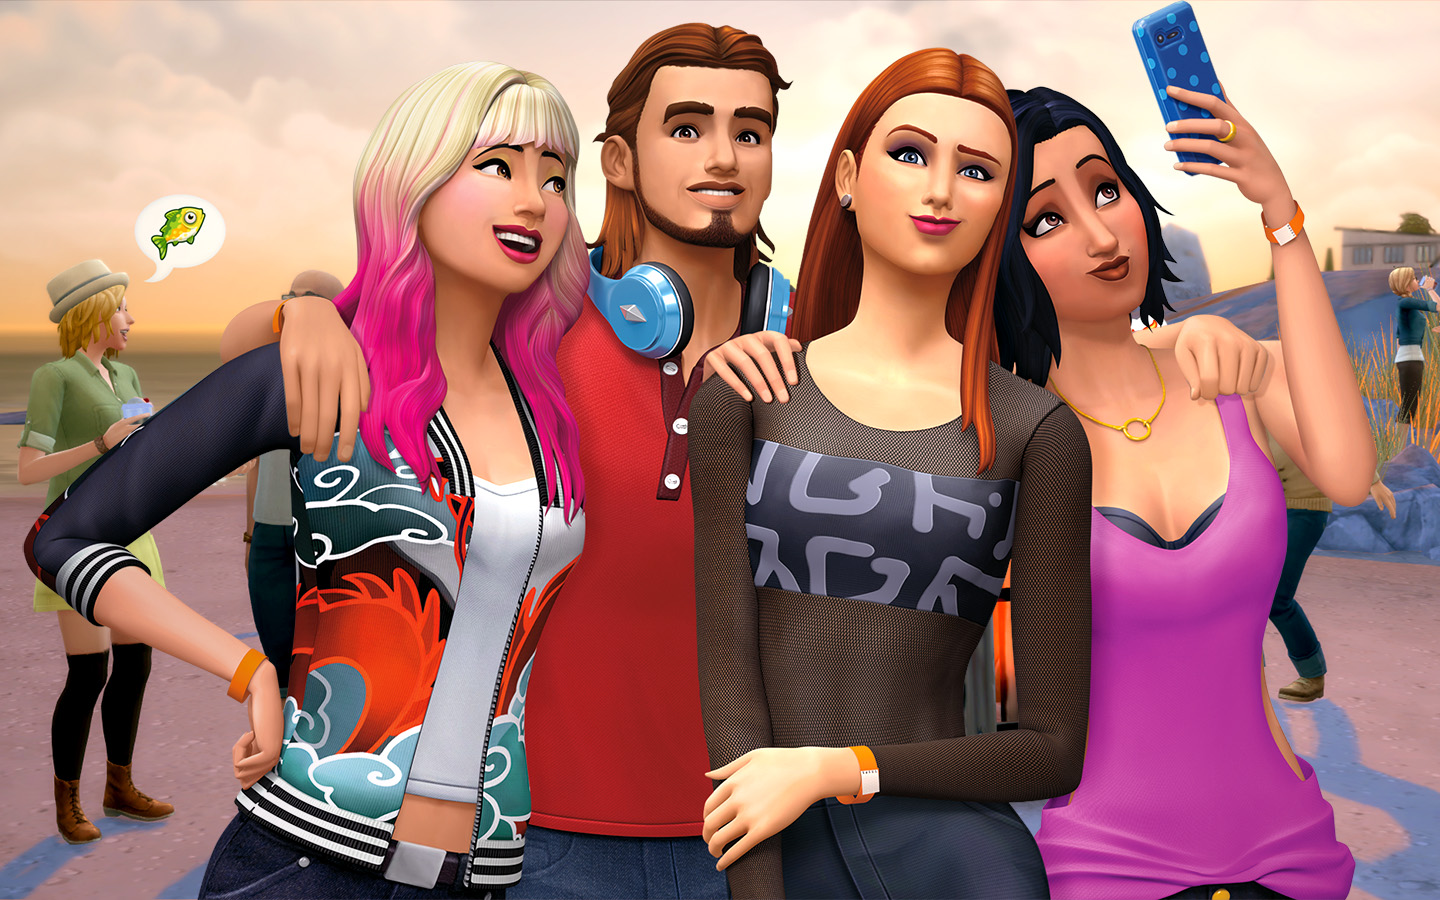 Sims 4 Mac Download For Free